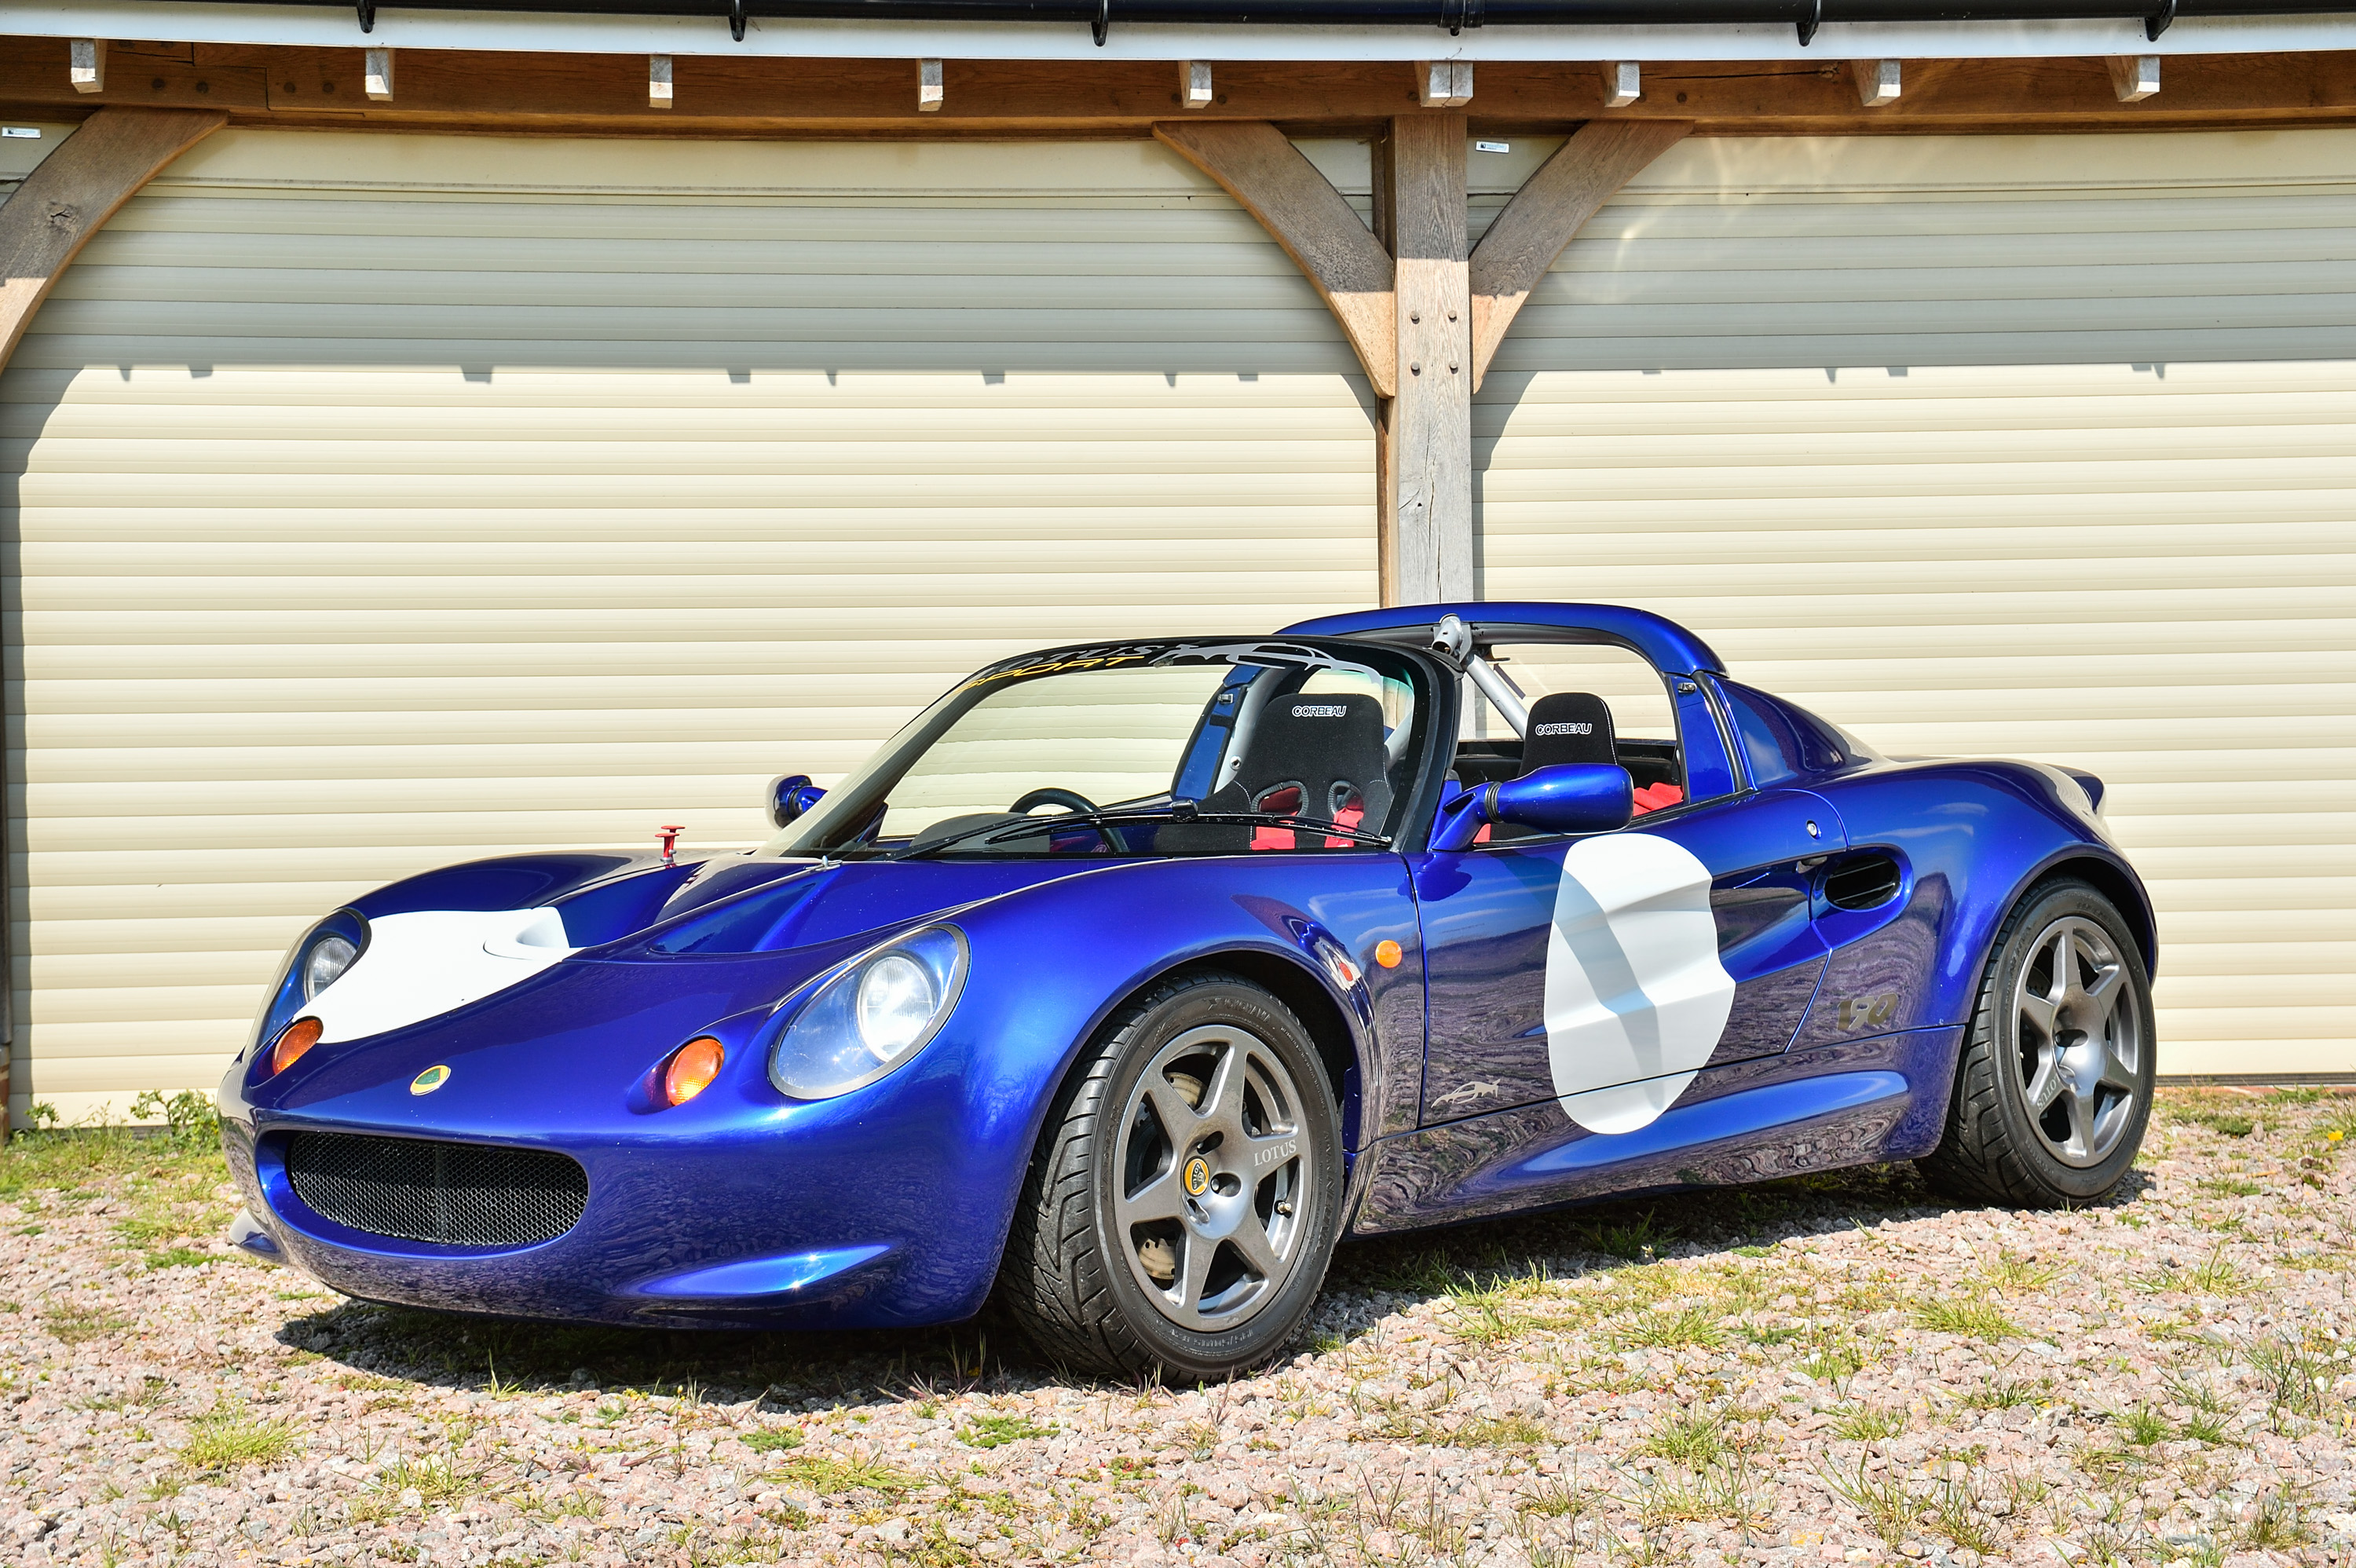 1998 LOTUS ELISE SPORT 190 for sale by auction in Suffolk, United Kingdom